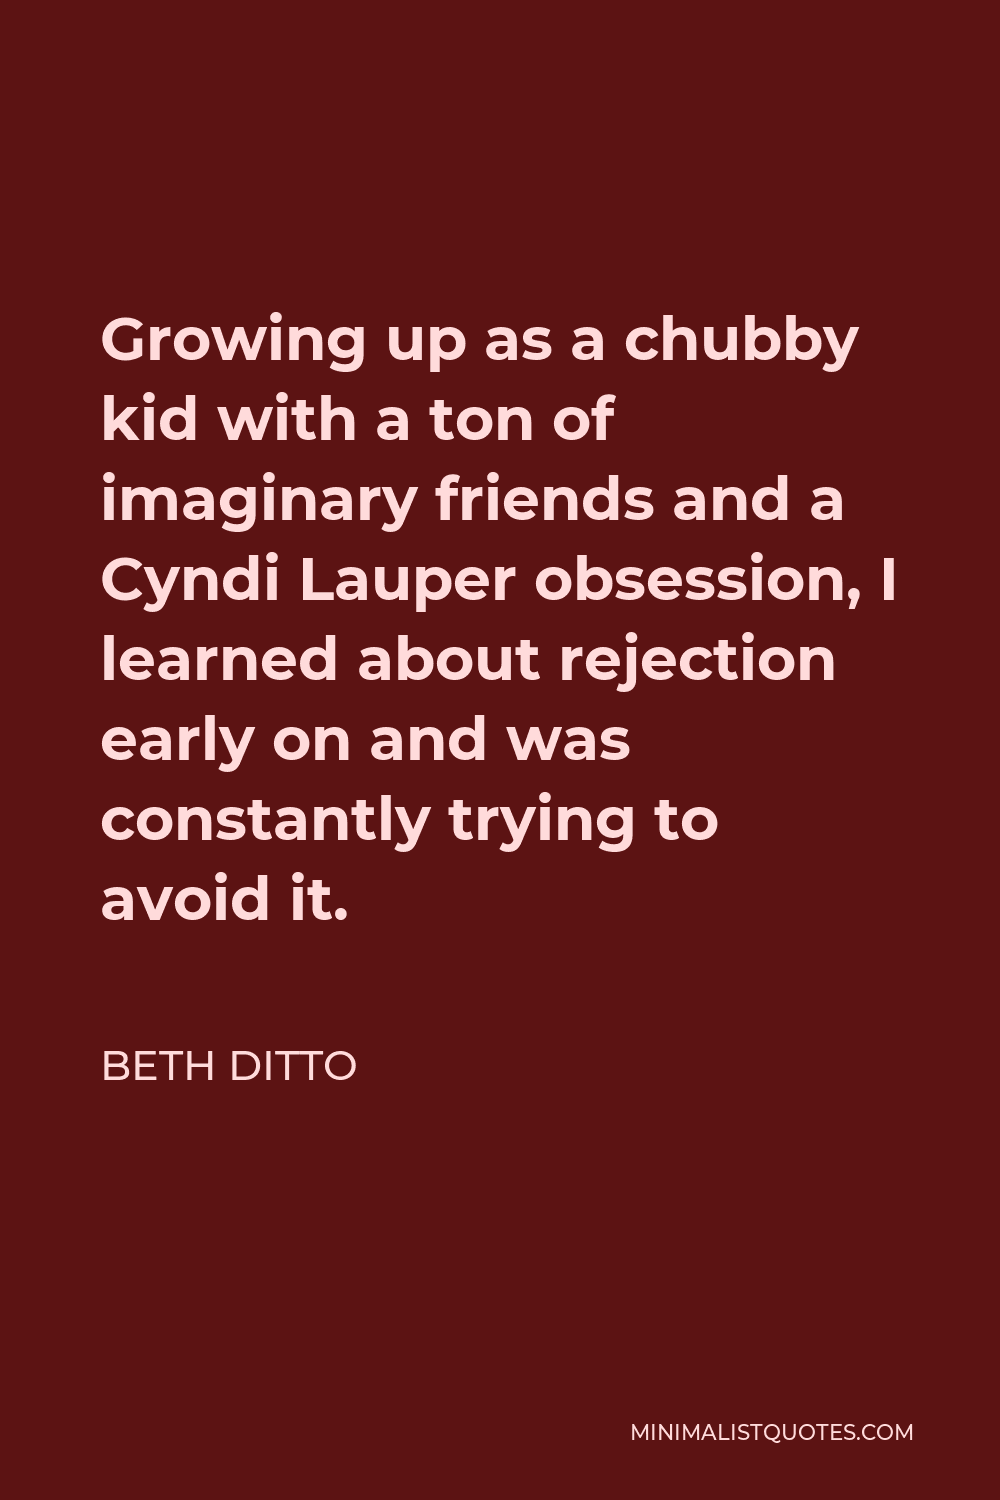 Beth Ditto Quote - Growing up as a chubby kid with a ton of imaginary friends and a Cyndi Lauper obsession, I learned about rejection early on and was constantly trying to avoid it.